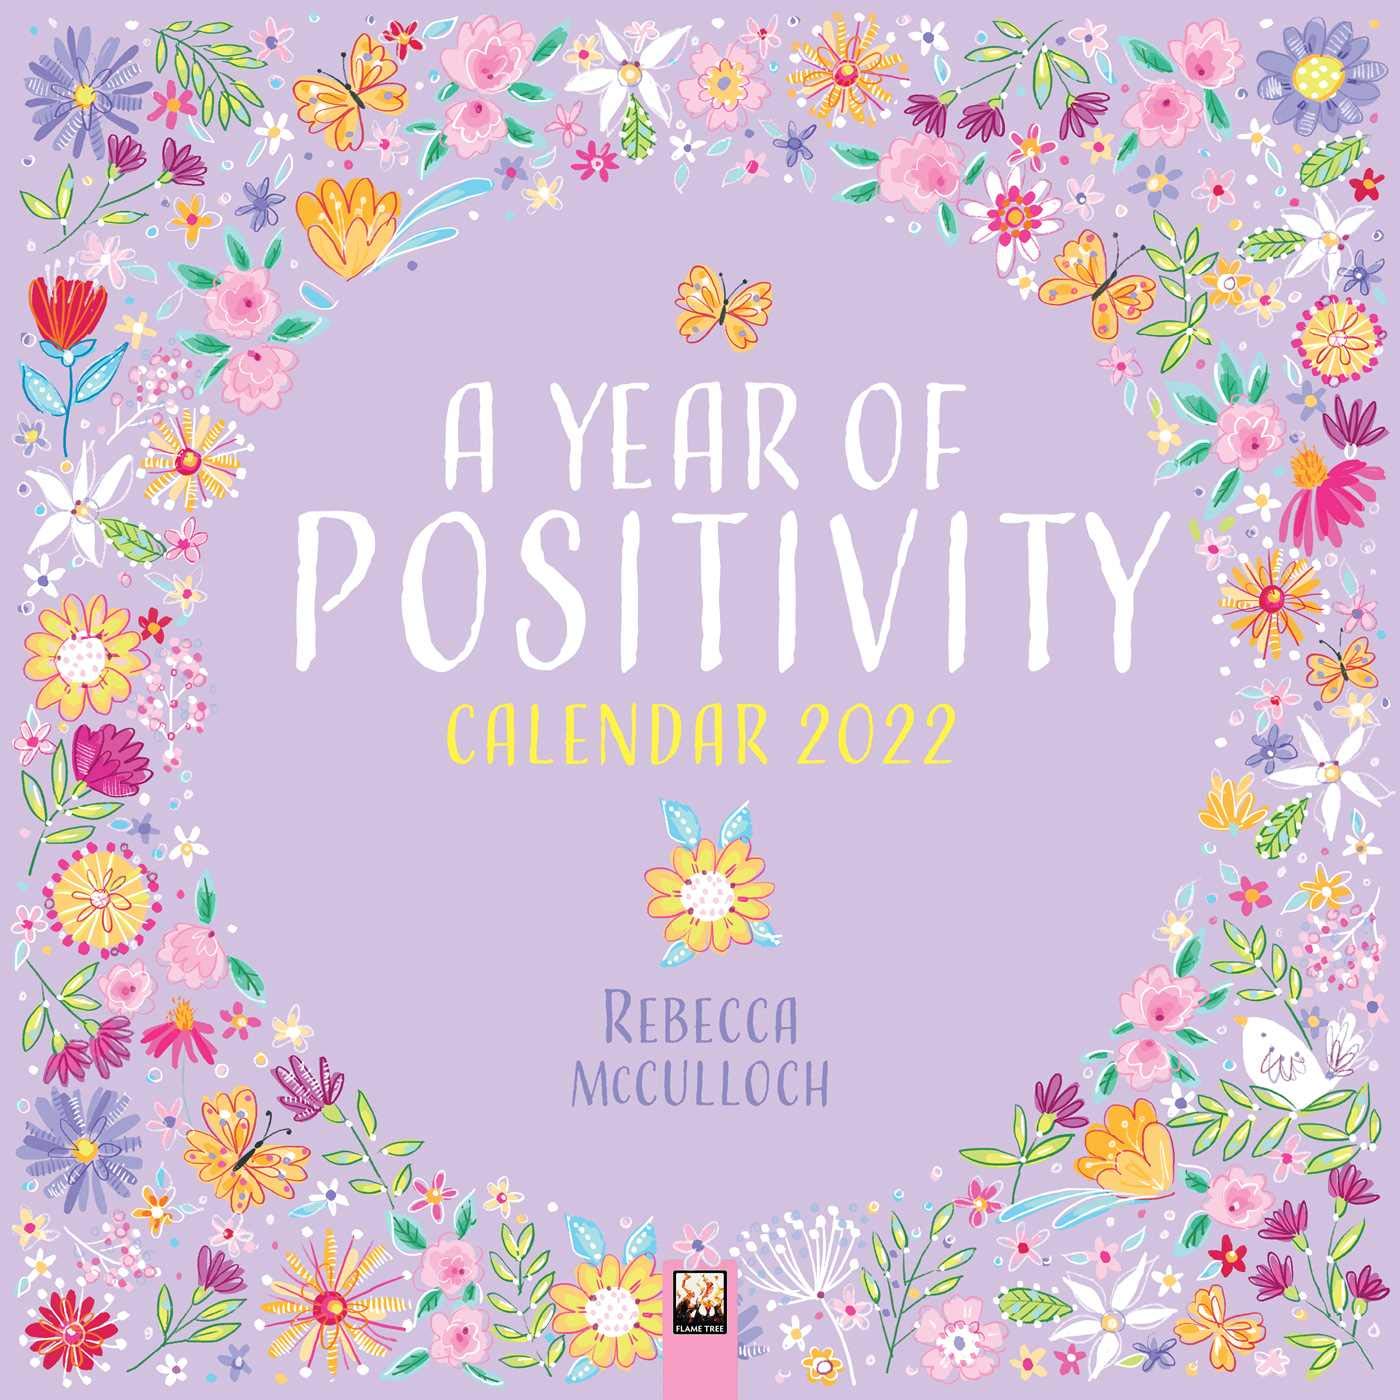 Calendar 2022 - Art - A Year of Positivity by Rebecca McCulloch | Flame Tree Studio